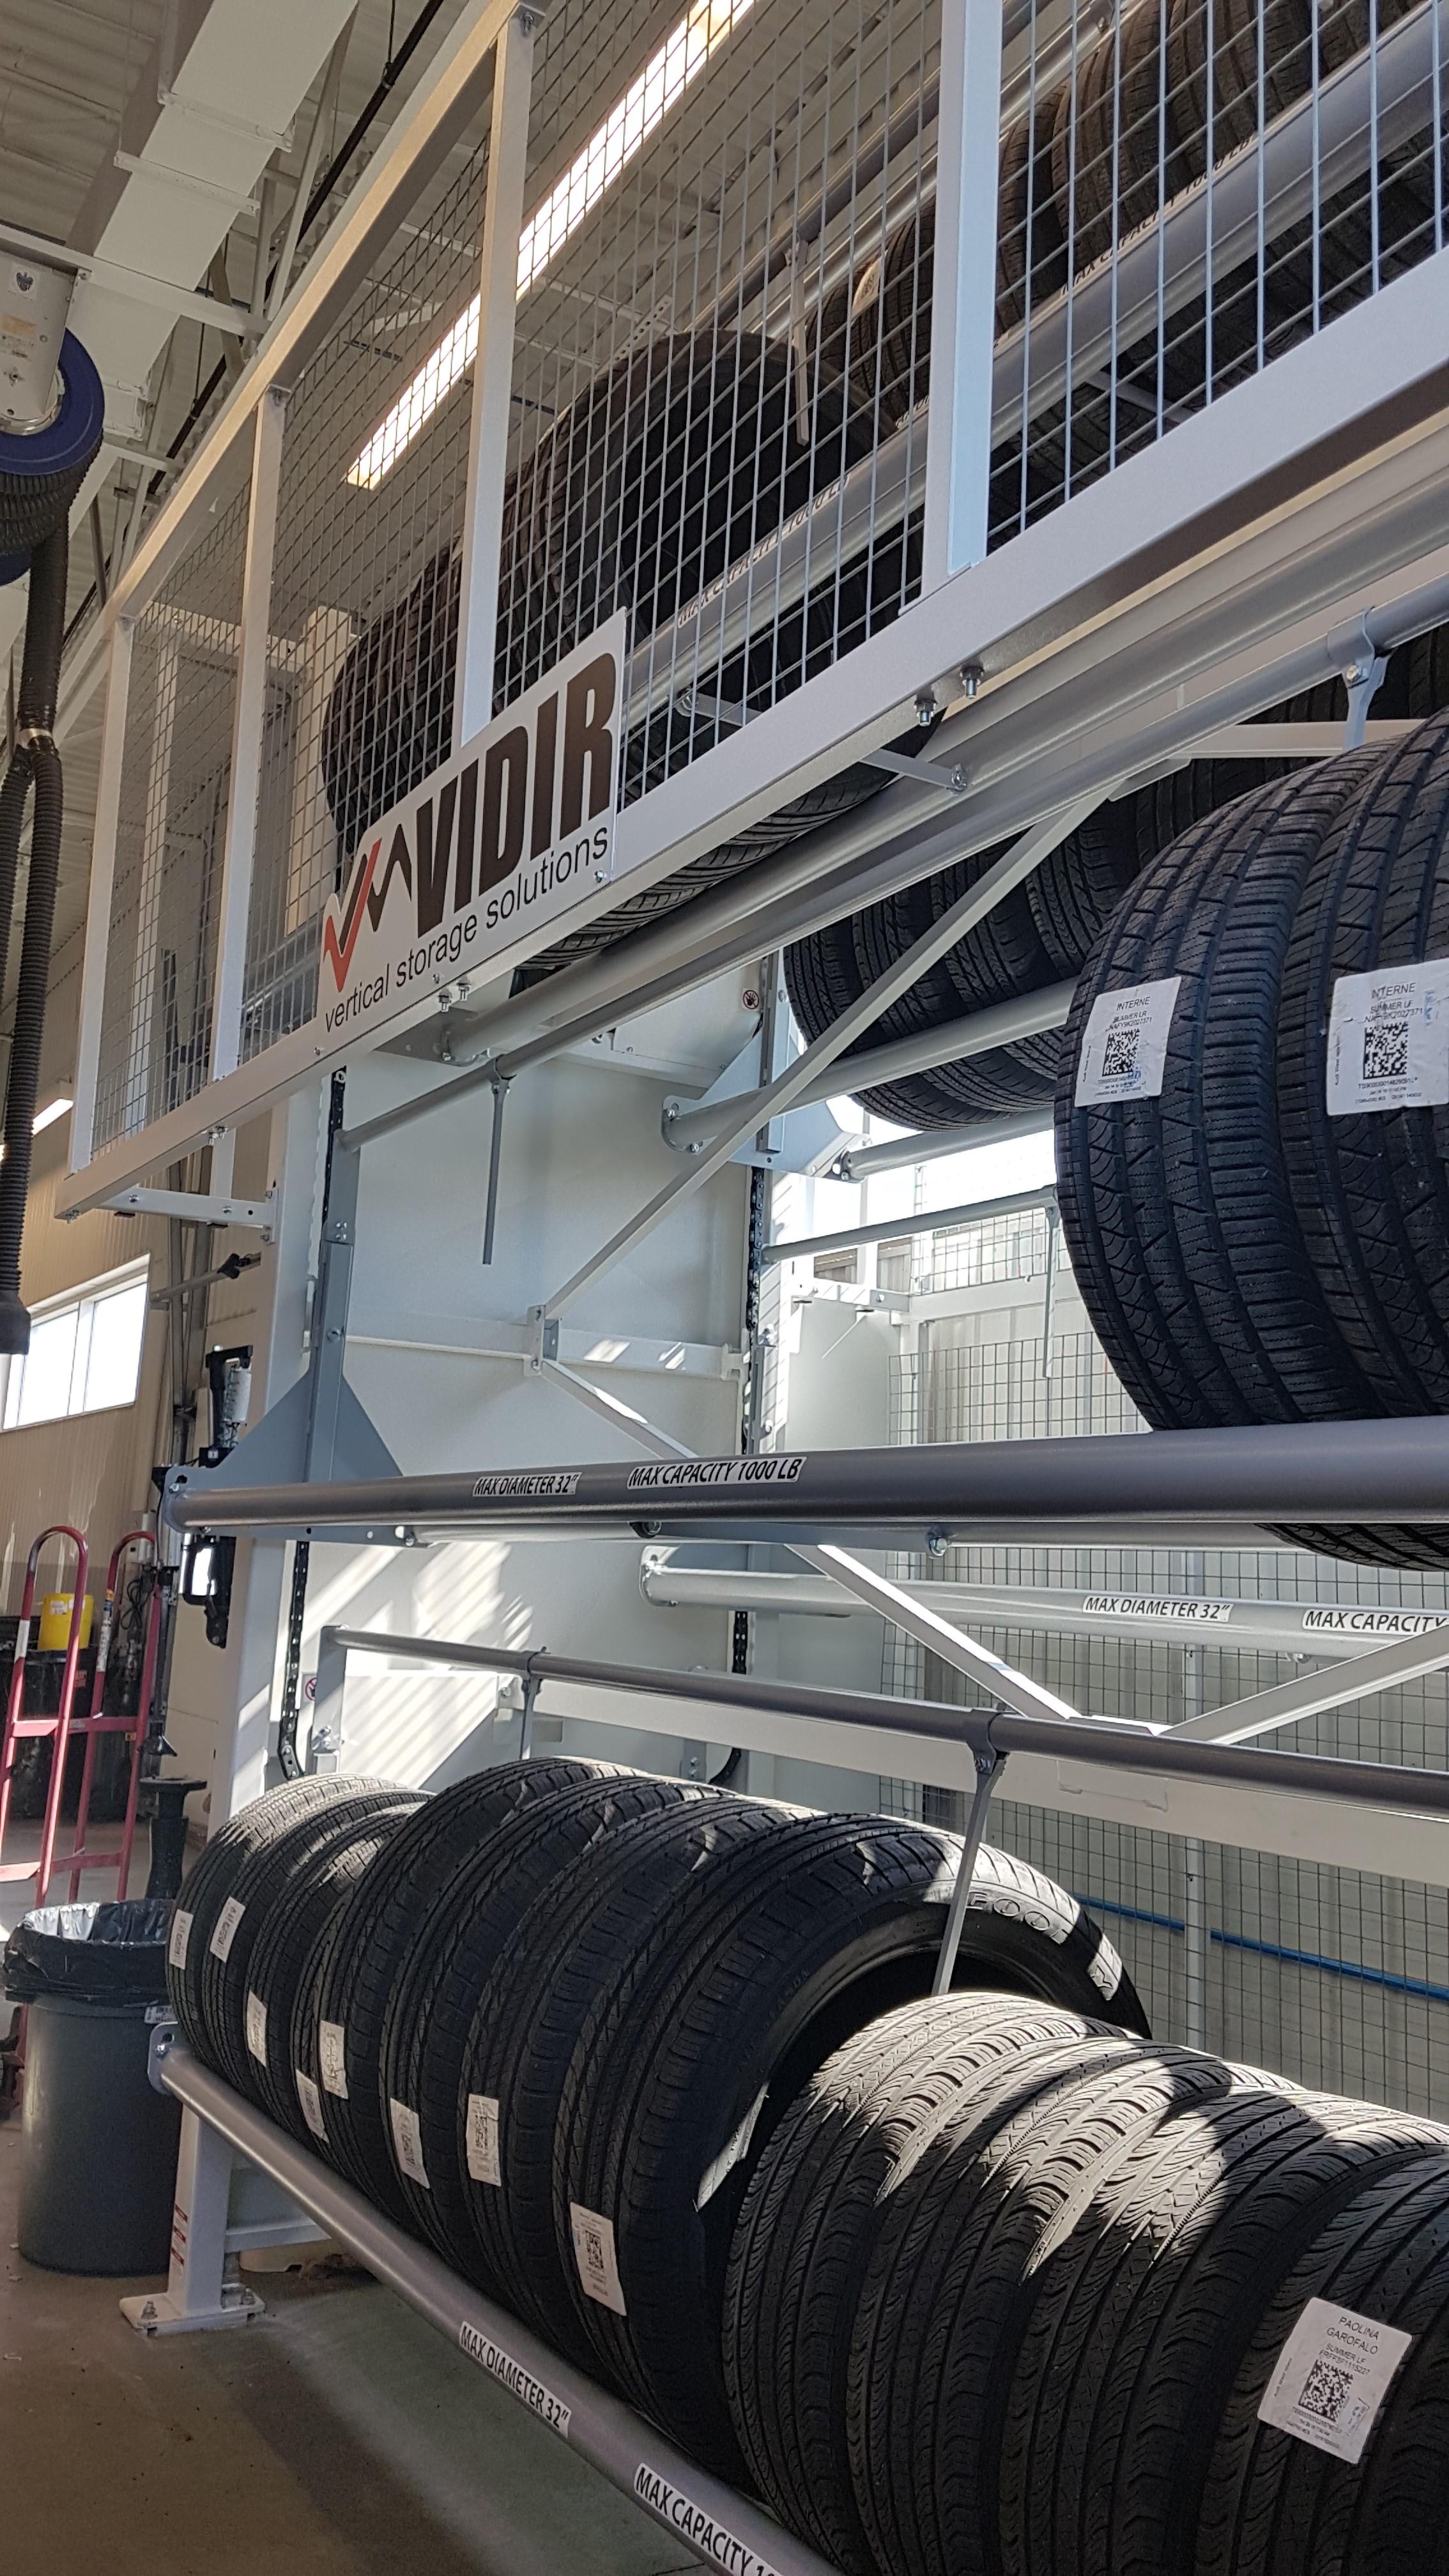 A Tire Carousel Makes the Transition From Season To Season Easier at Audi West-Island